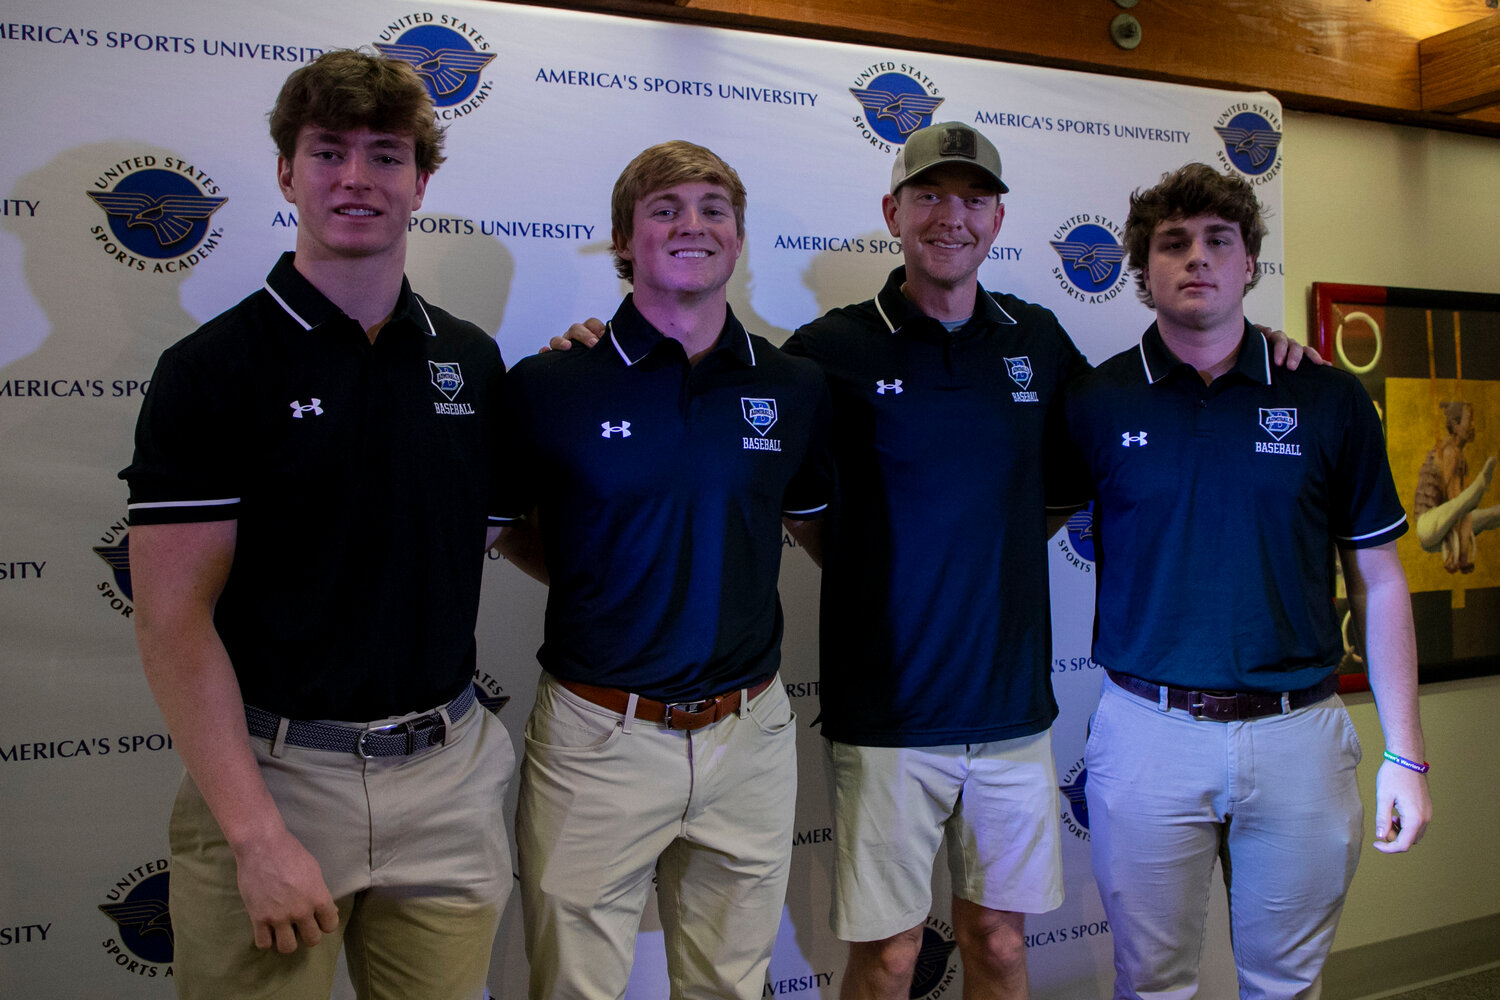 At Tuesday’s media day event at the United States Sports Academy, Bayside Academy baseball was represented by Teague Broadhead, Gatlin Pitts, head coach Matt Limbaugh and Carson Joyner in previewing their season.